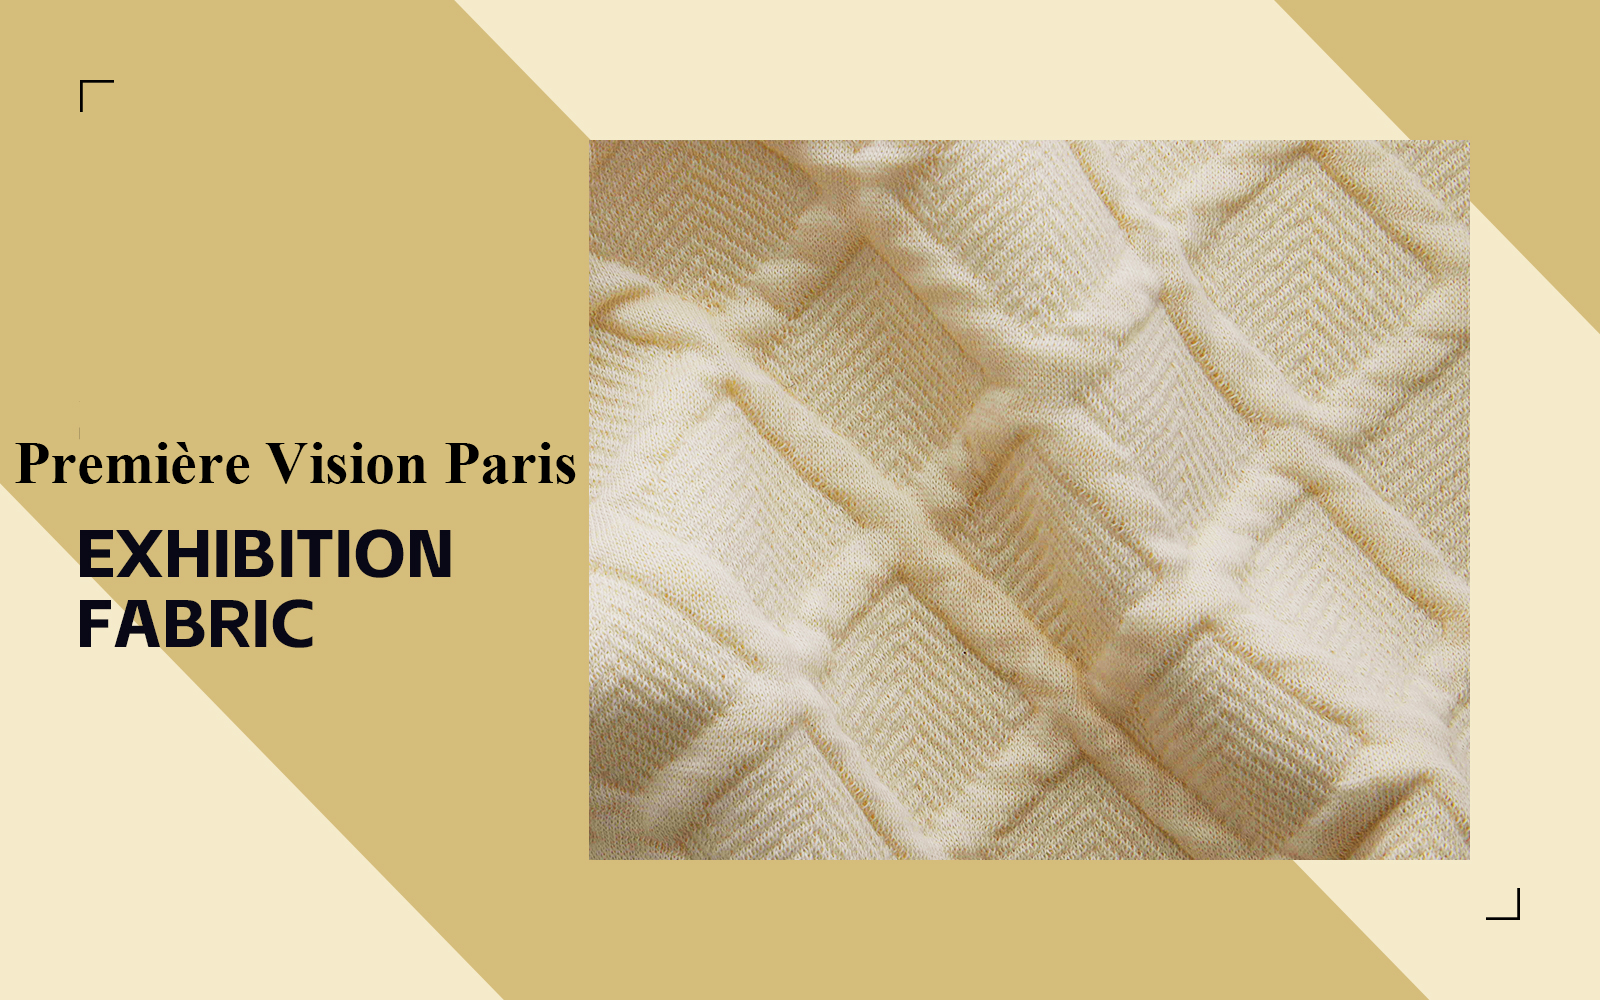 Knitted Fabric -- The Exhibition Analysis of Première Vision Paris